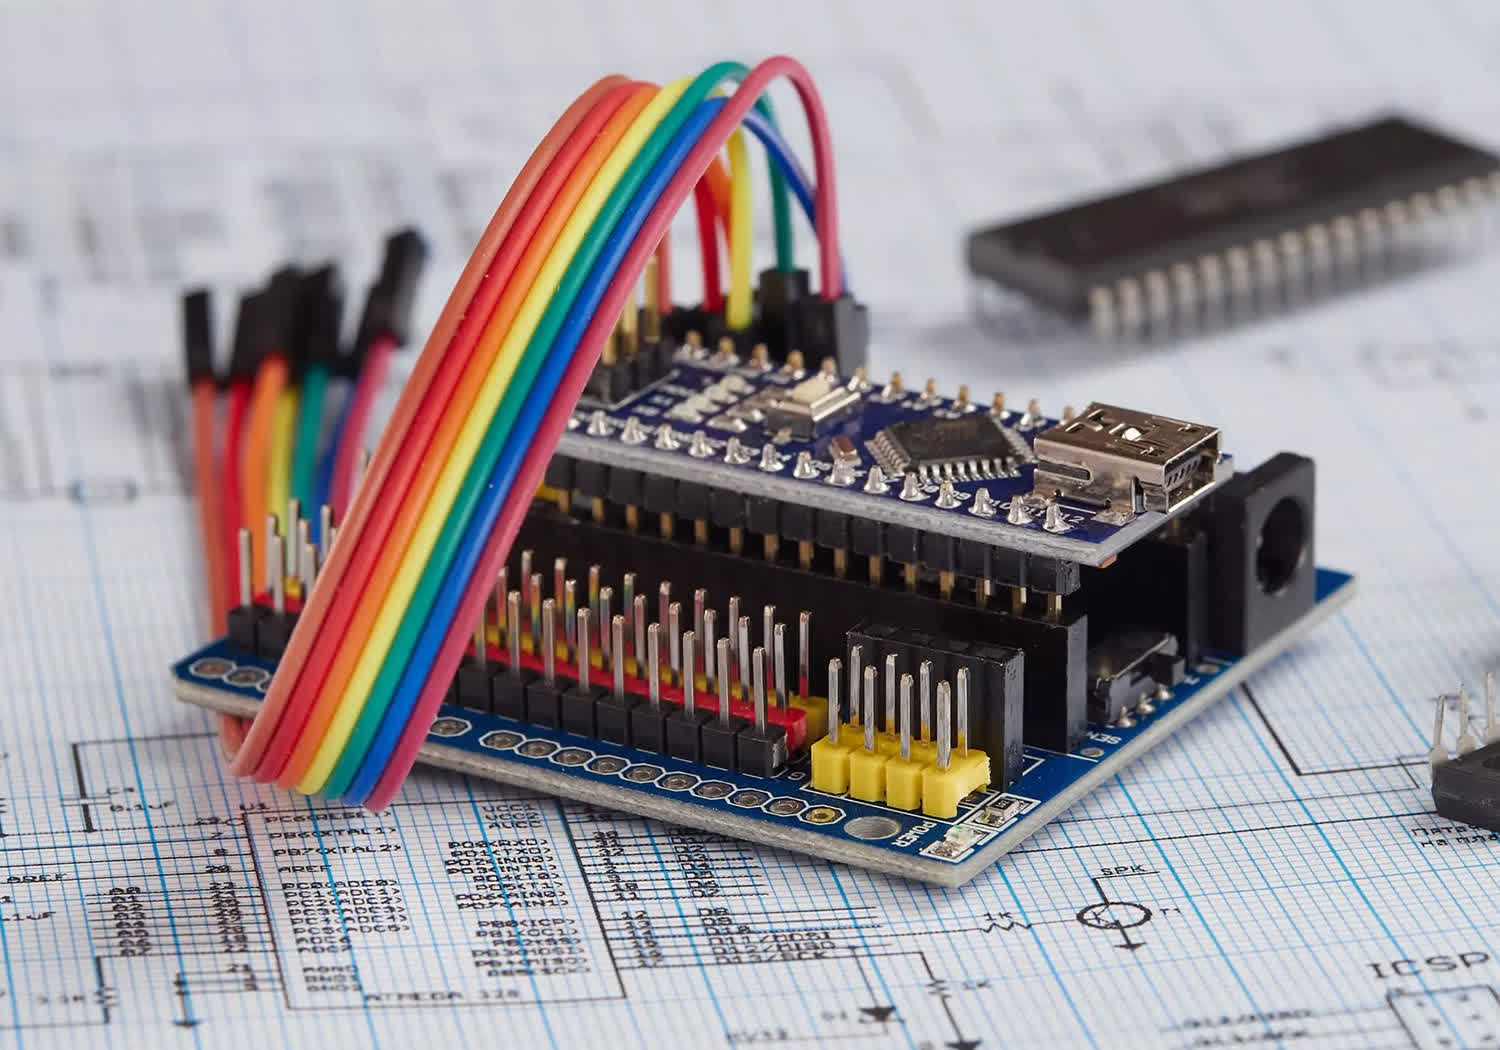 Arduino IDE 2.0 brings autocompletion, code navigation, and live debugger